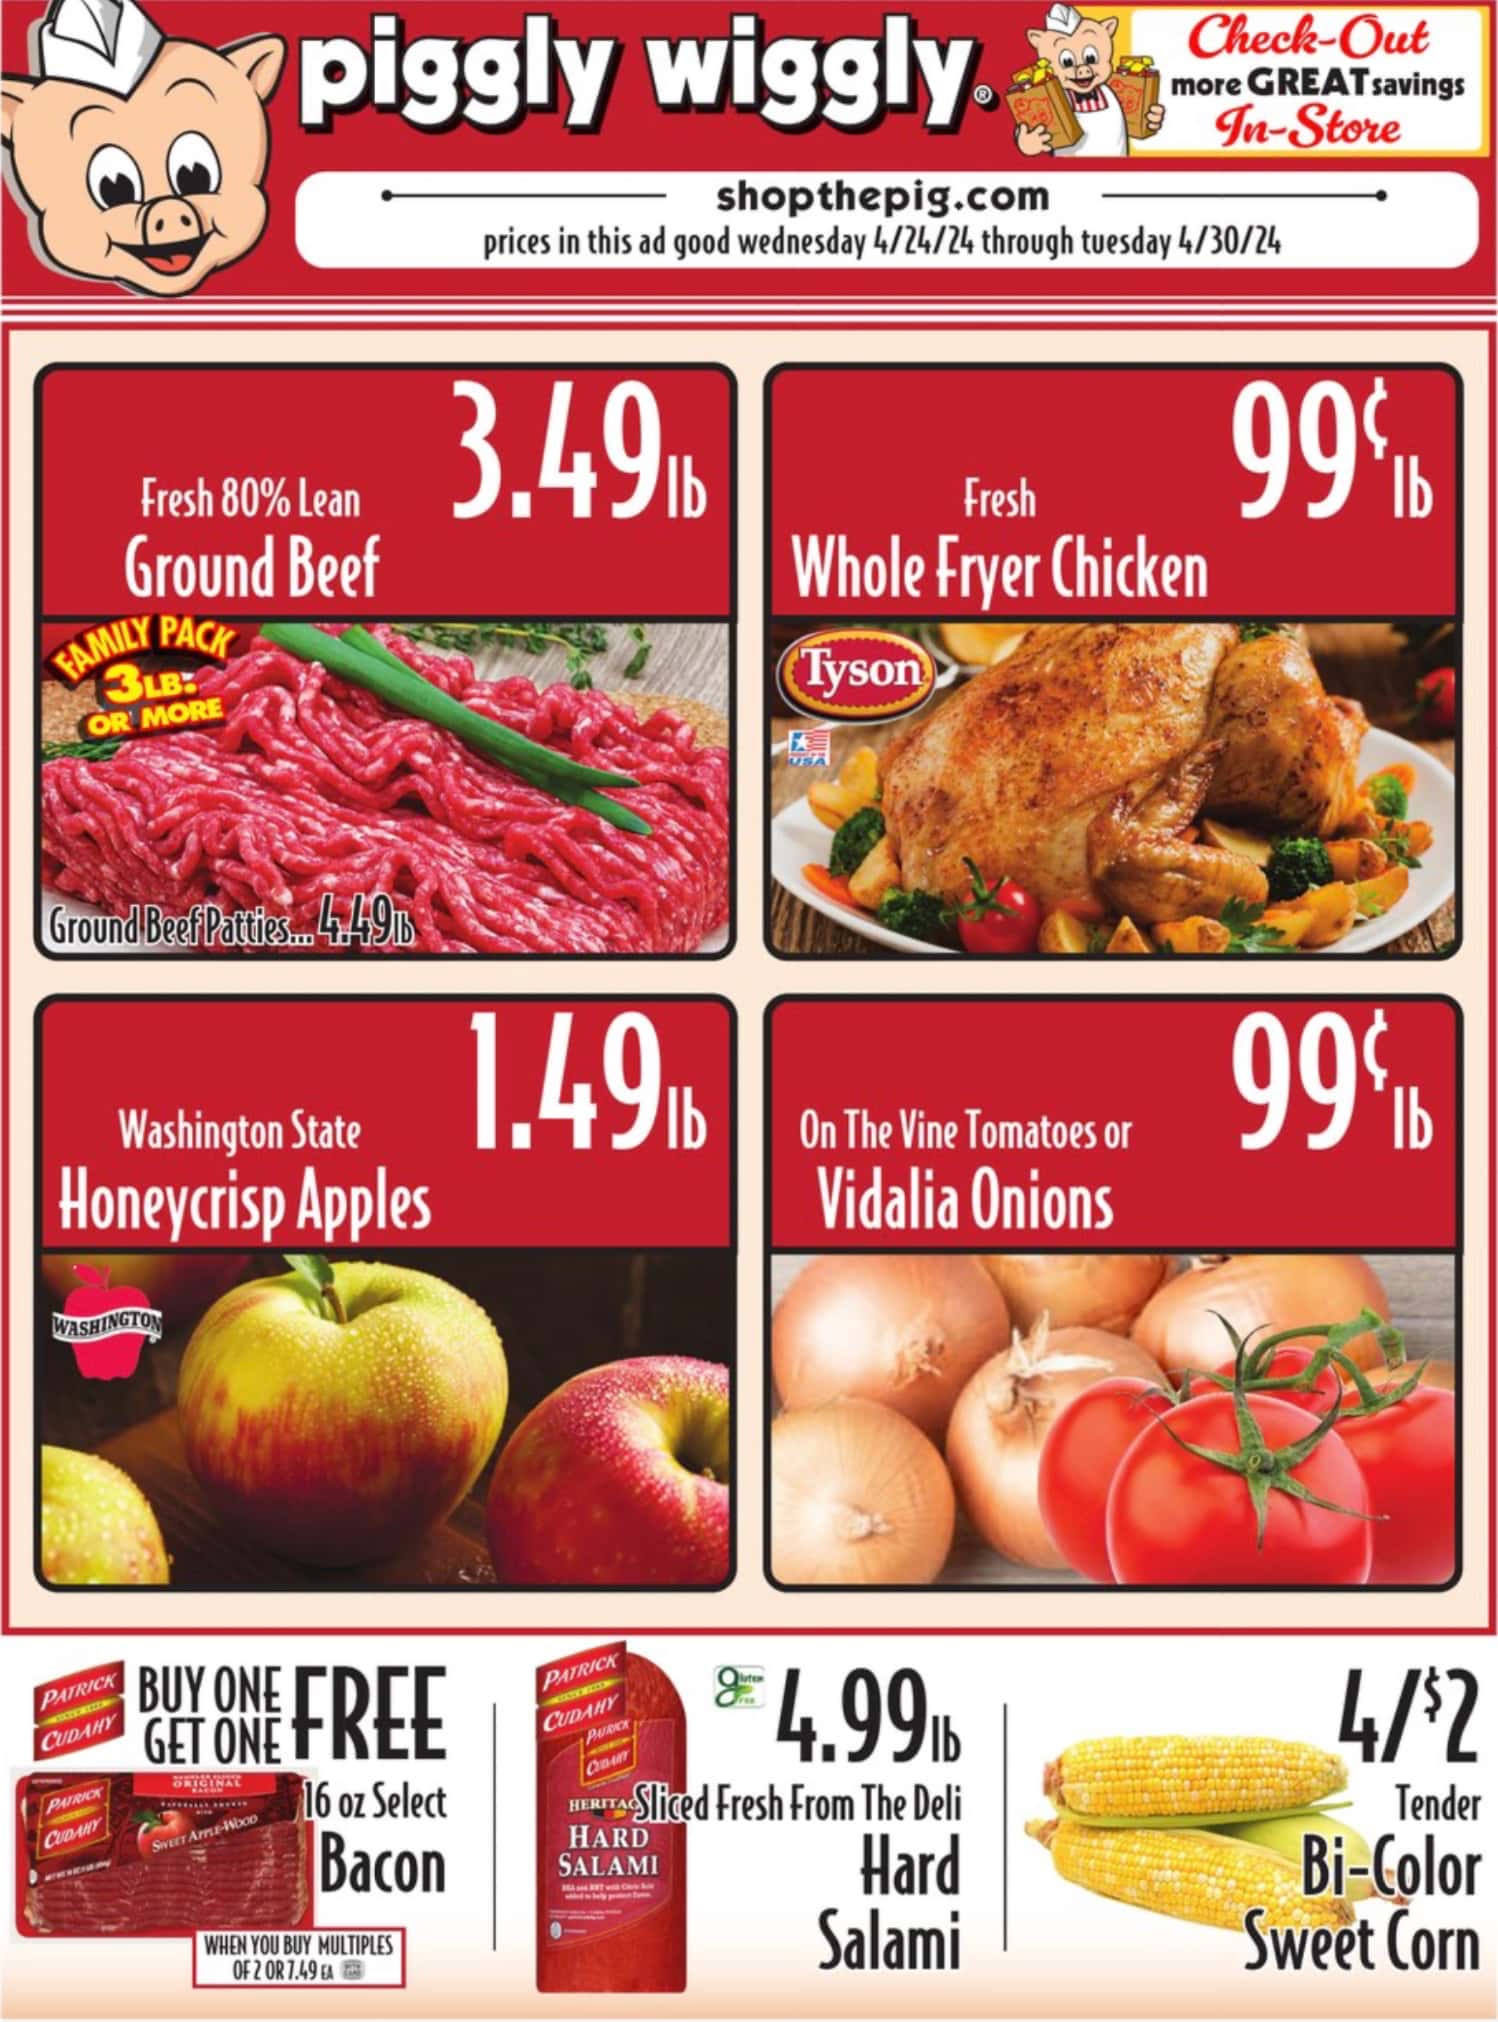 PigglyWiggly_weekly_ad_042424_01